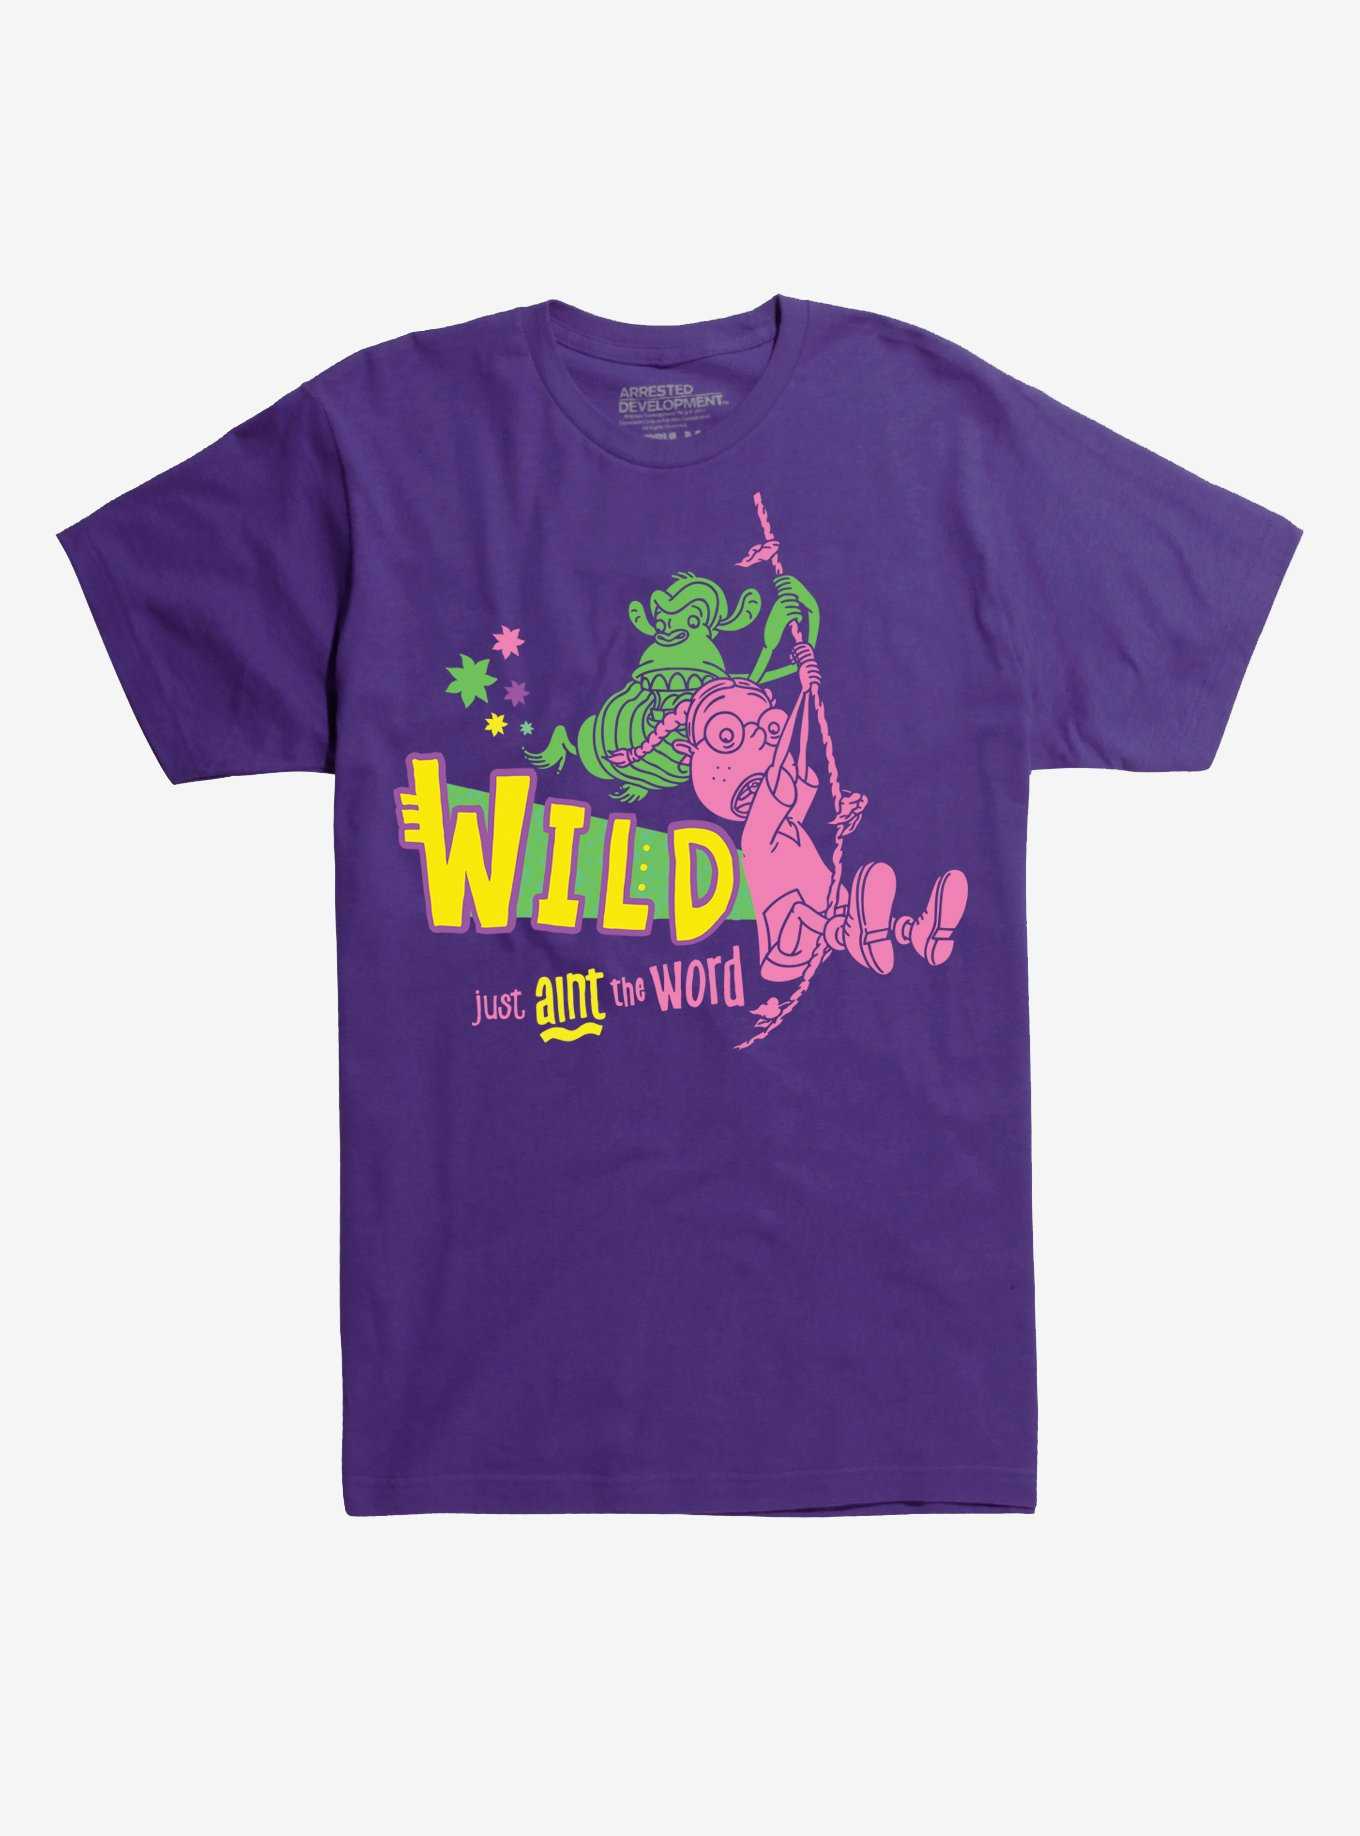 The Wild Thornberry's Wild Just Ain't the Word T-Shirt, , hi-res